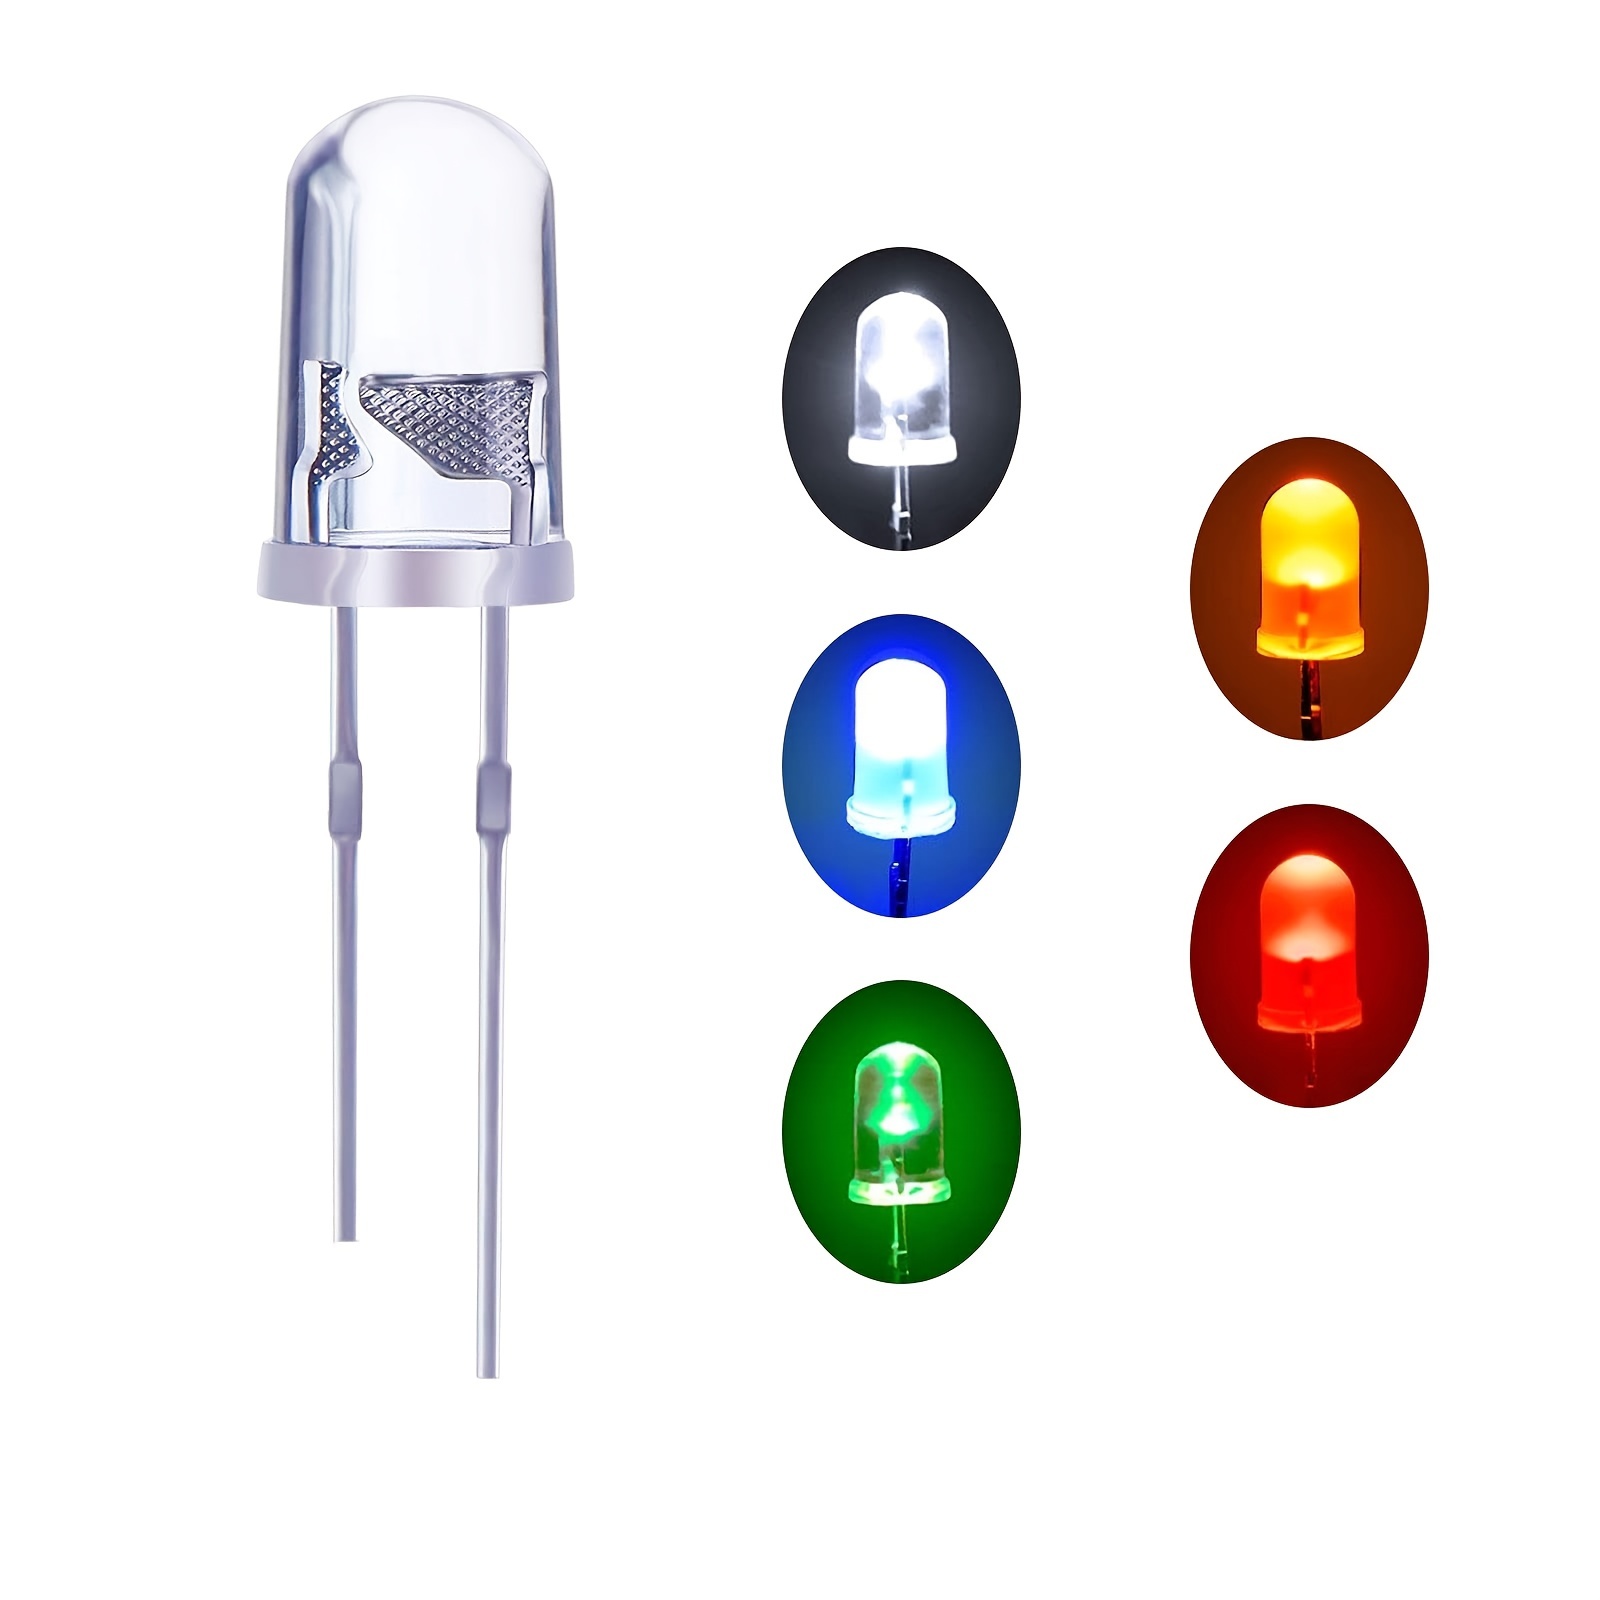 100pcs 3mm 5mm LED Light Emitting Diodes Commonly Used Diodes 2 Pins Yellow  Blue Green White Red (5 Colors, 20pcs Each)